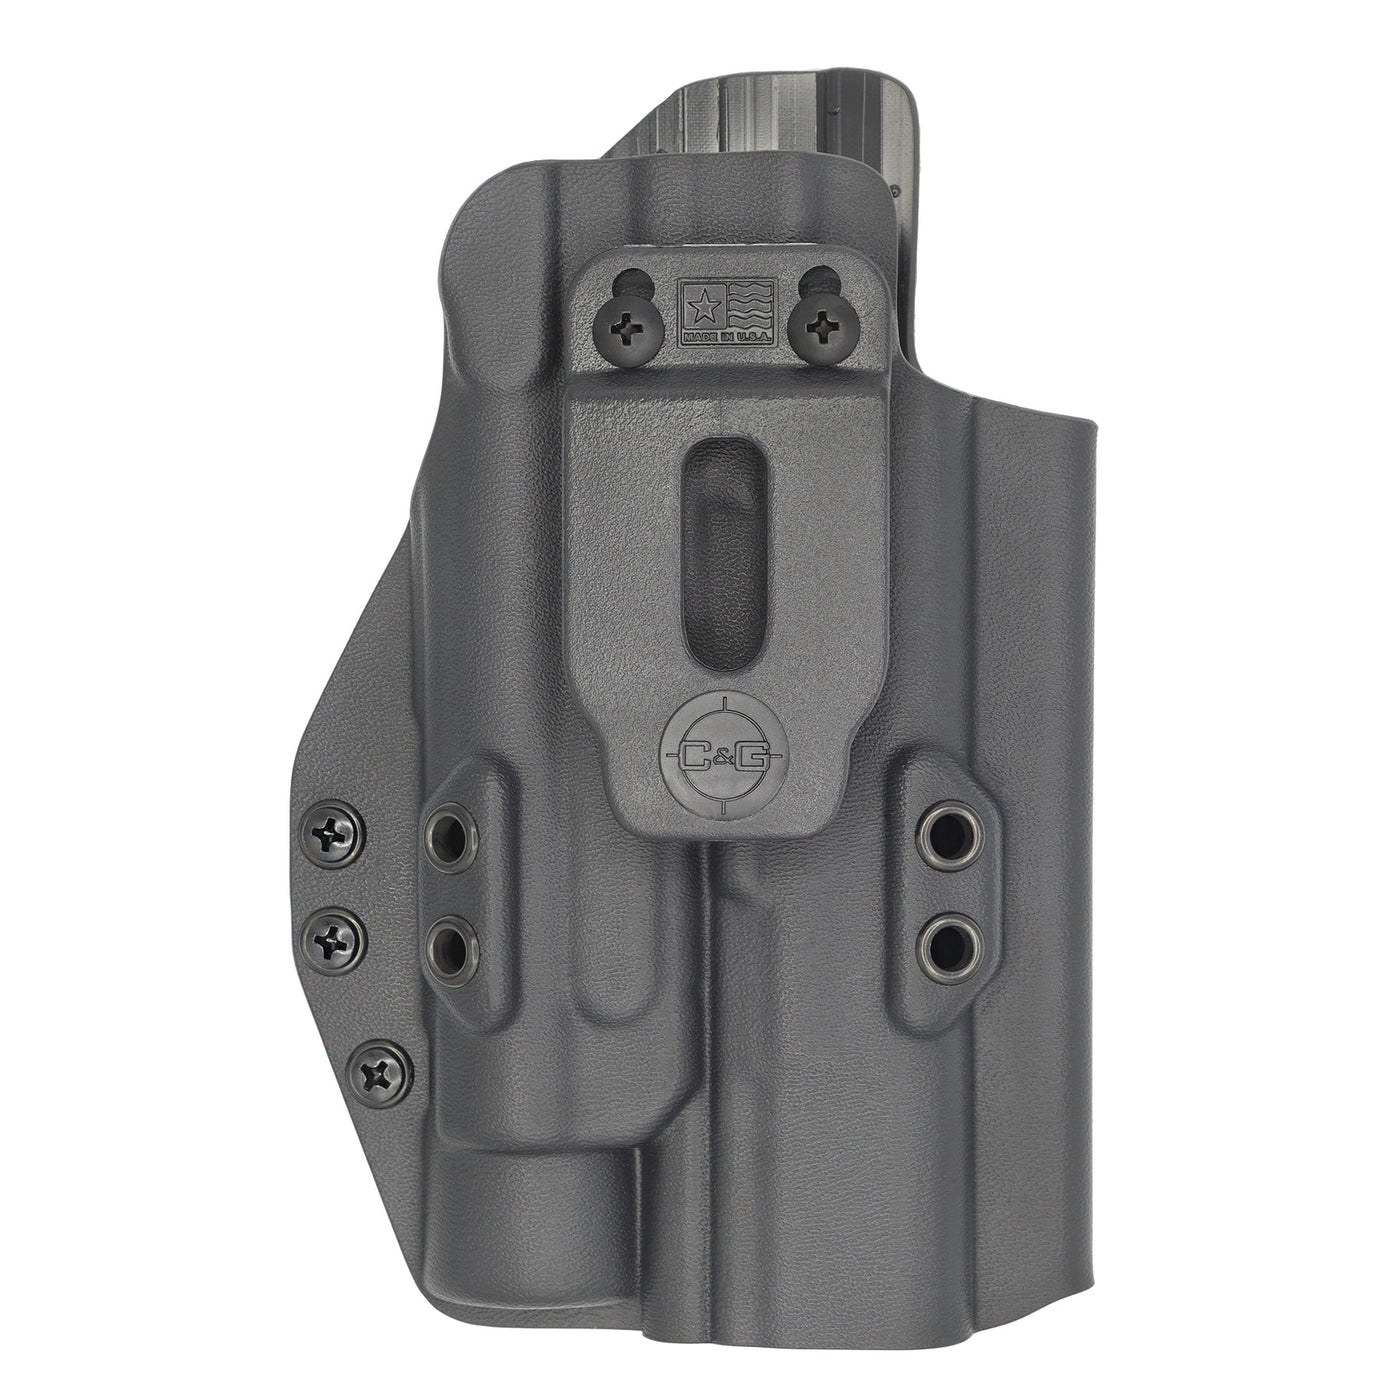 C&G Holsters custom IWB Tactical CZ P07/9 TLR1